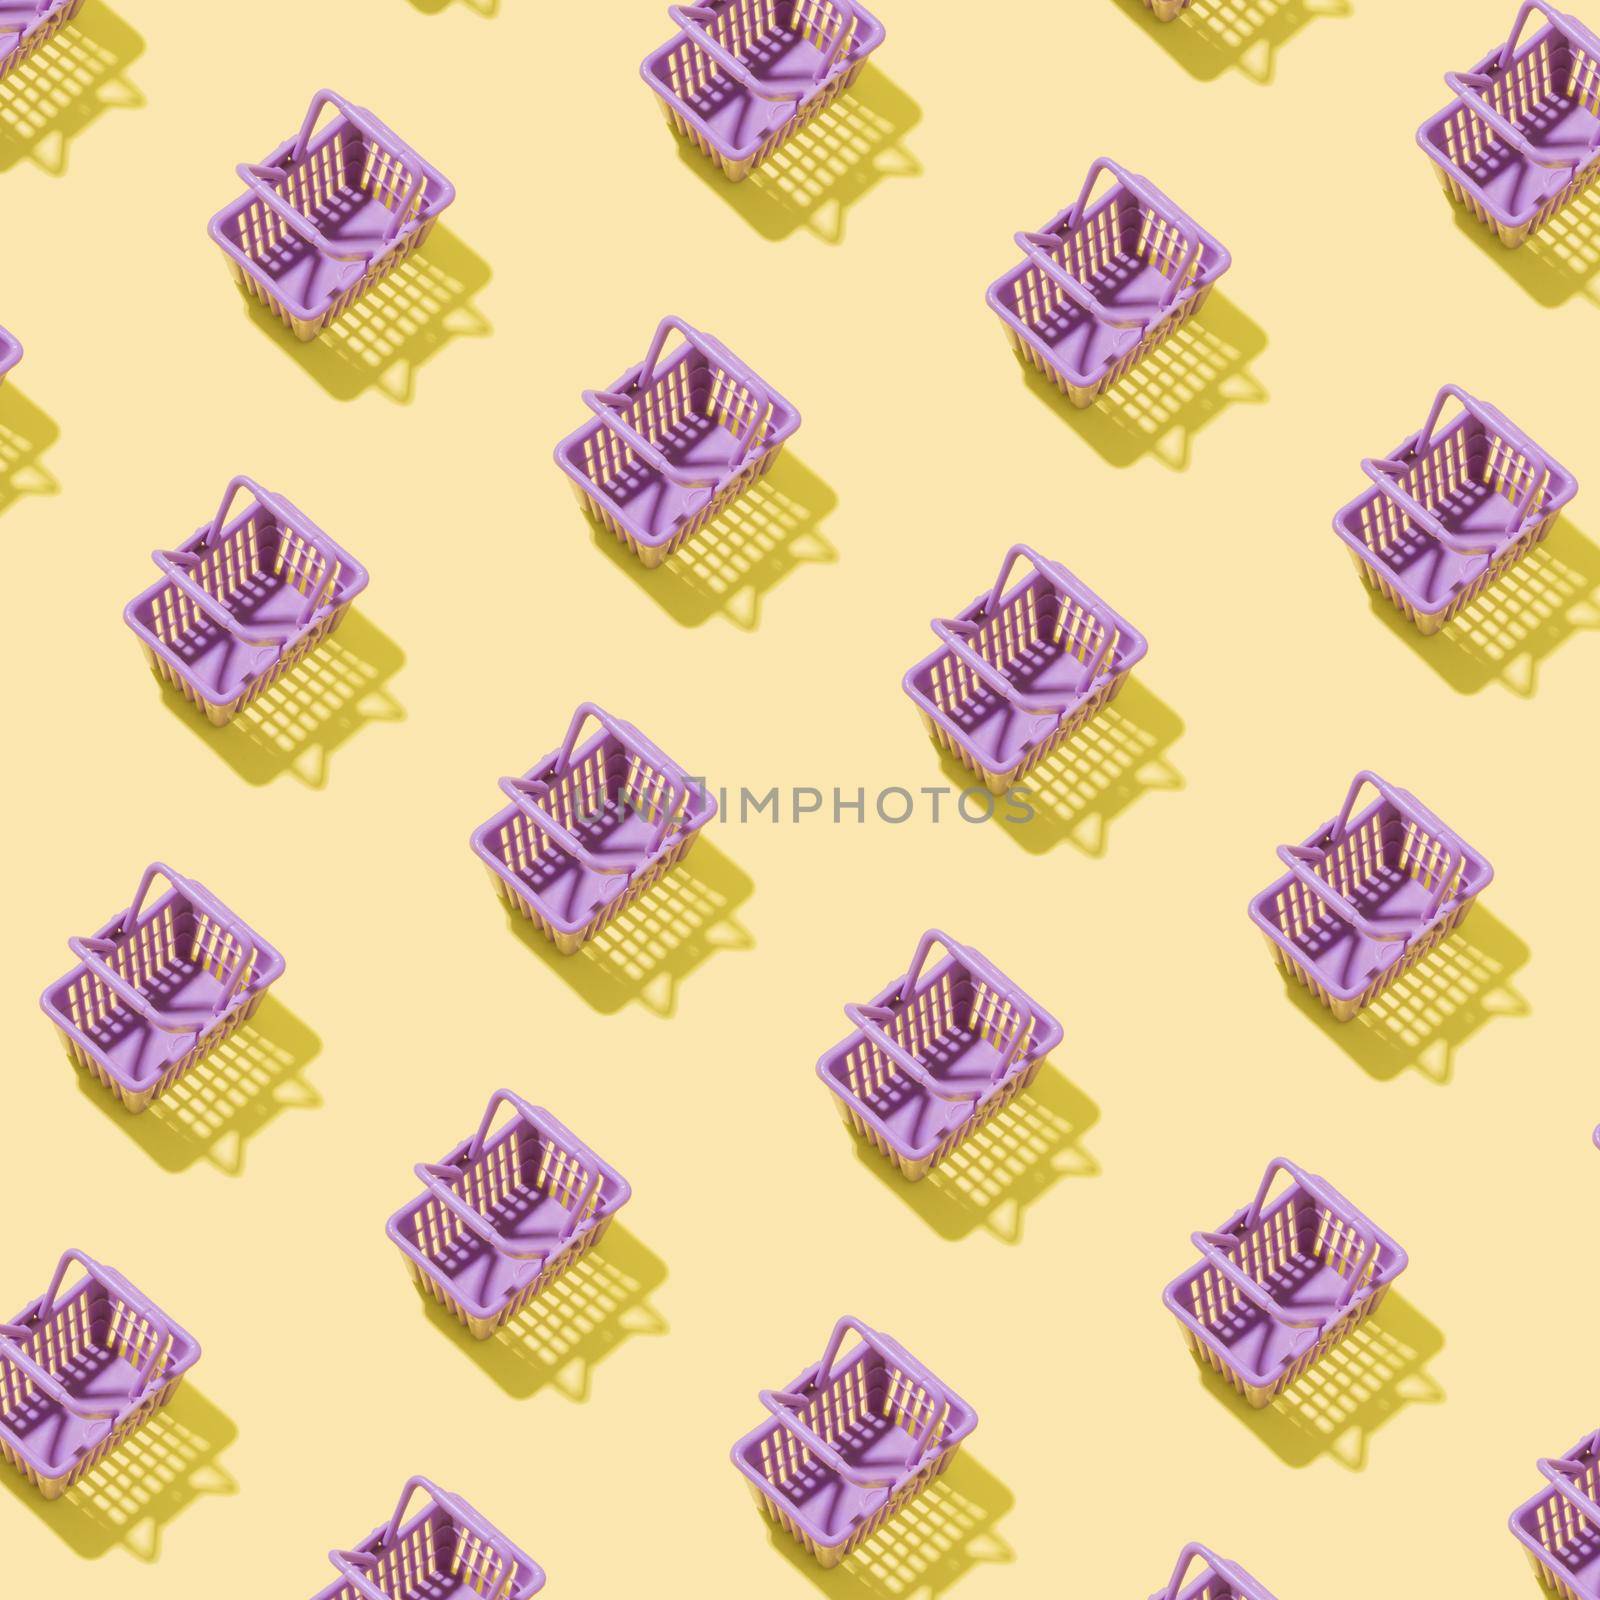 Pattern with miniature shopping basket in a supermarket on a yellow background. Minimalistic creative shopping concept by ssvimaliss